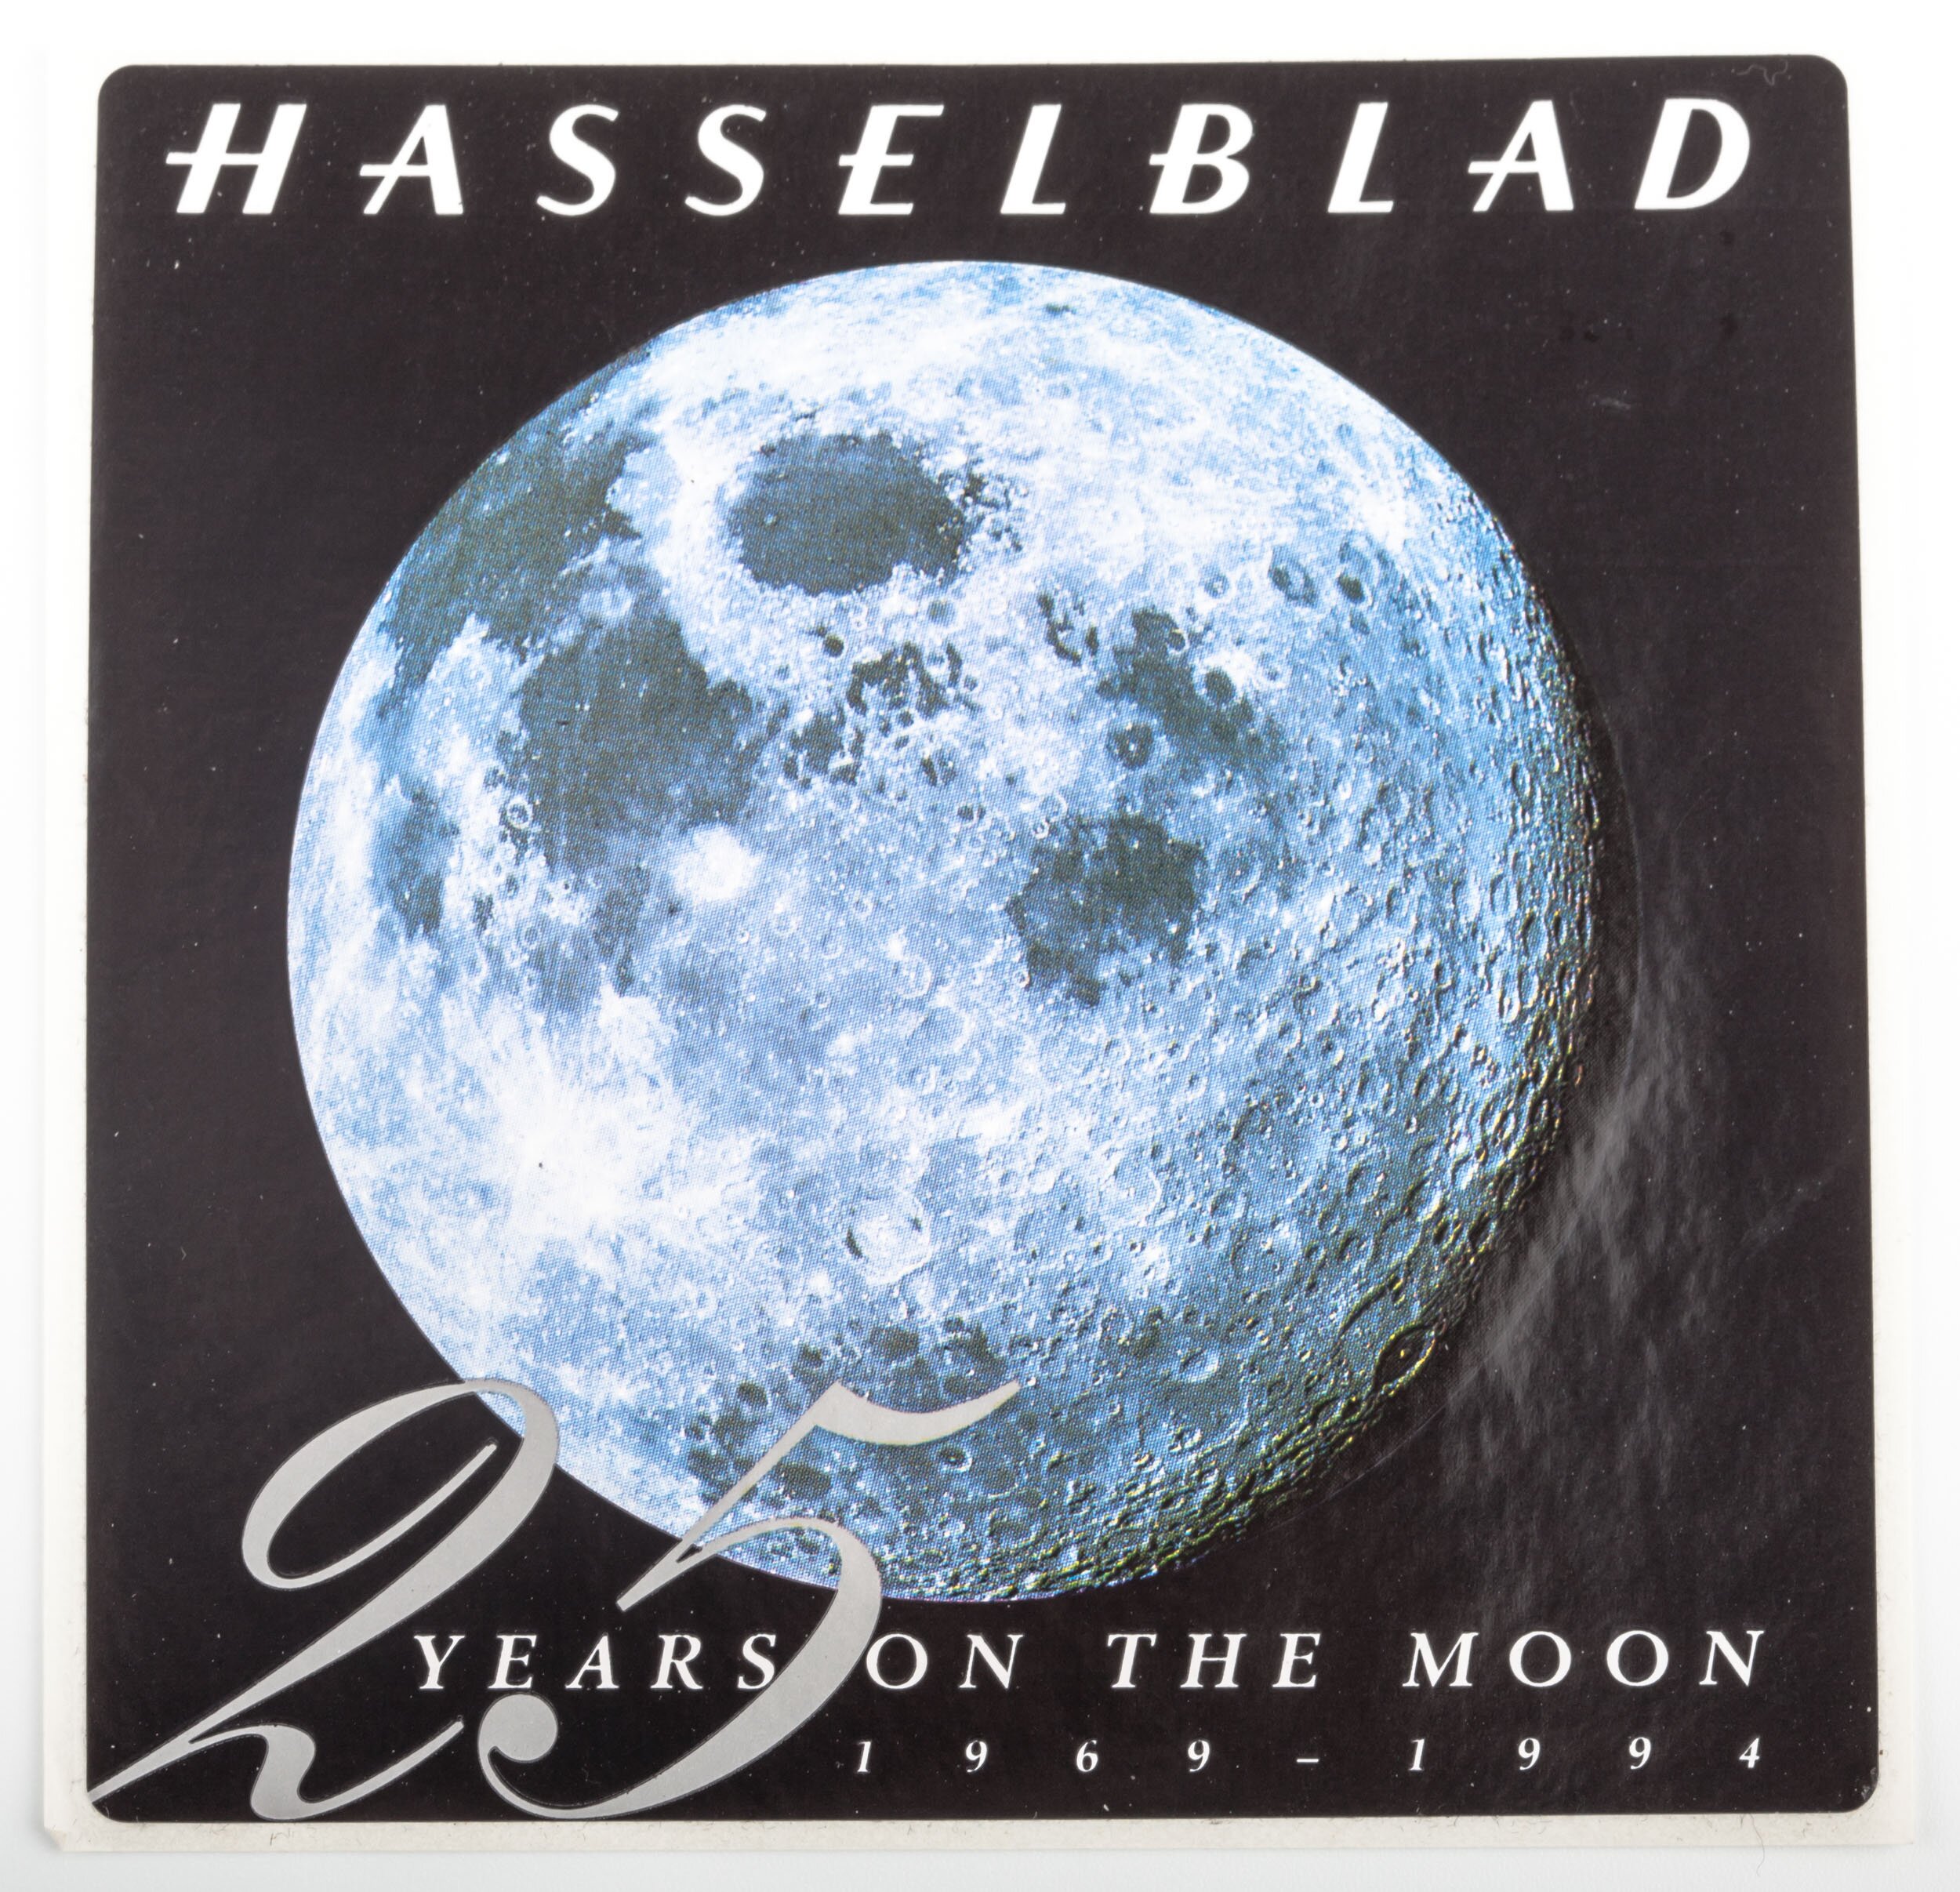 Hasselblad Sticker "25 Years on the moon 1969-1994"